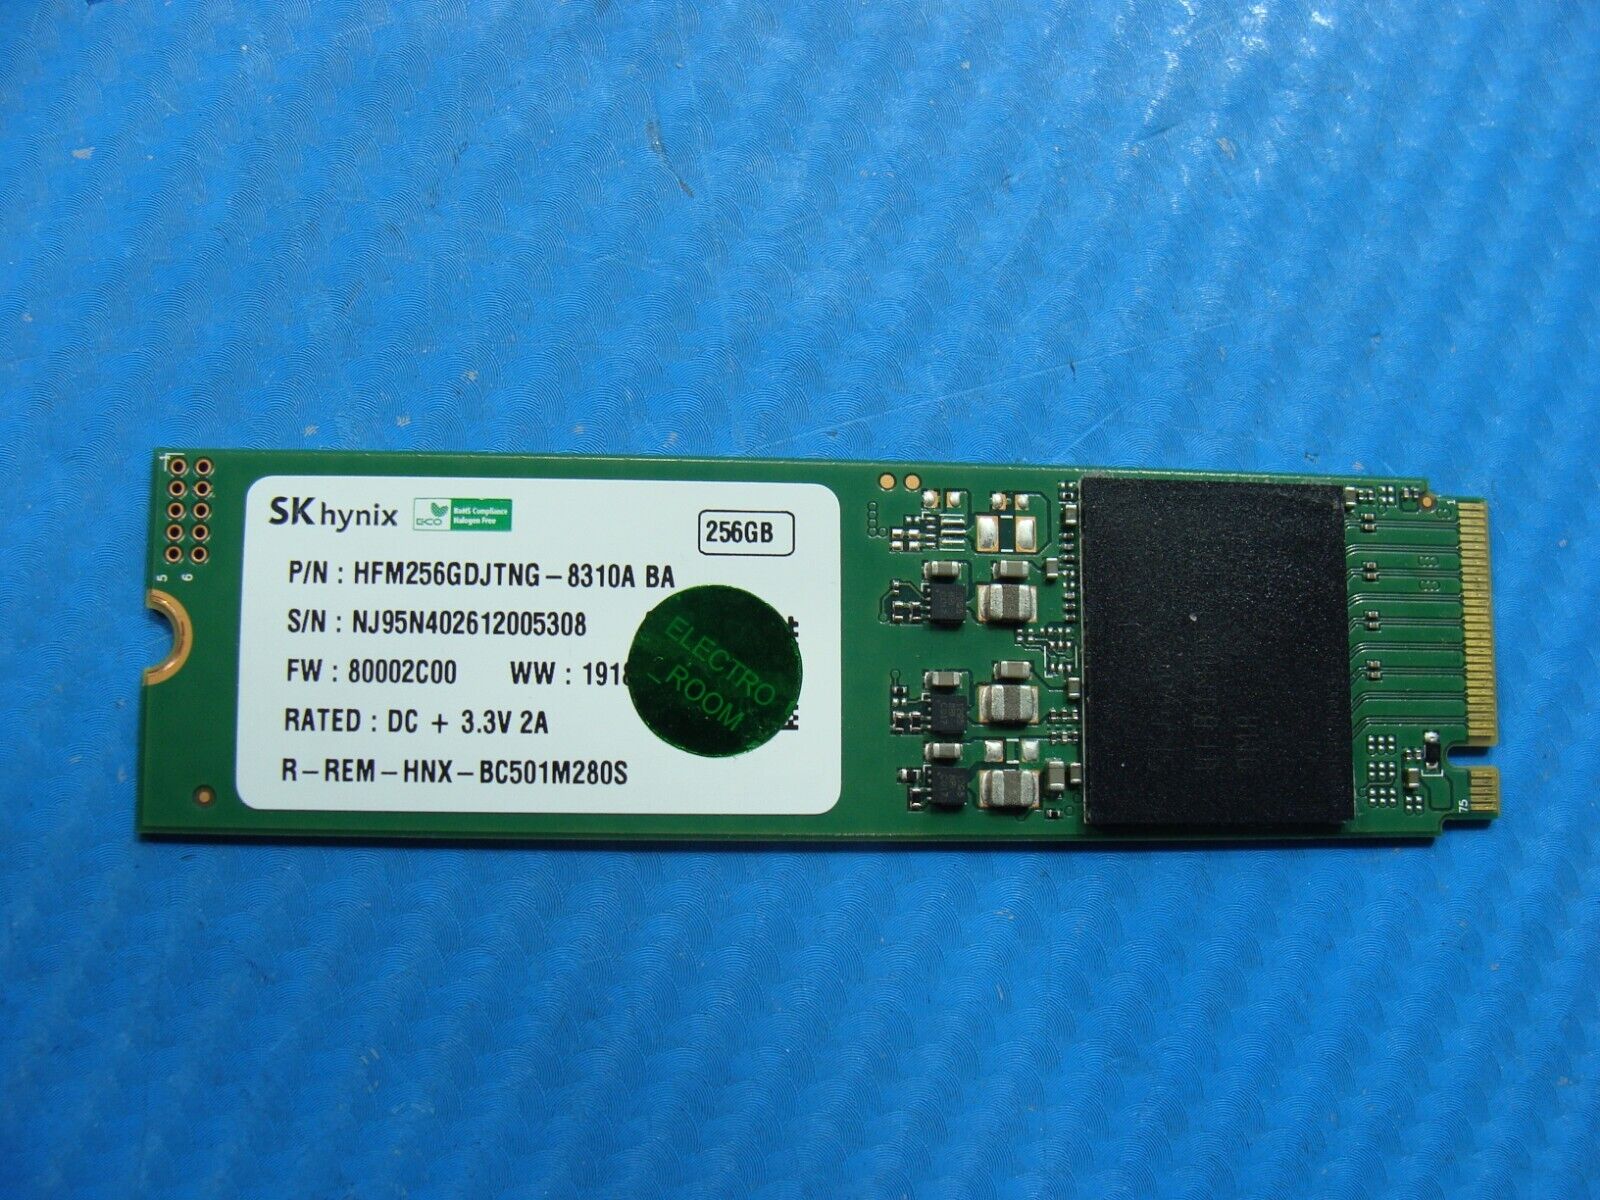 Acer AN515-43-R0YM SK Hynix 256GB NVMe M.2 Solid State Drive HFM256GDJTNG-8310A